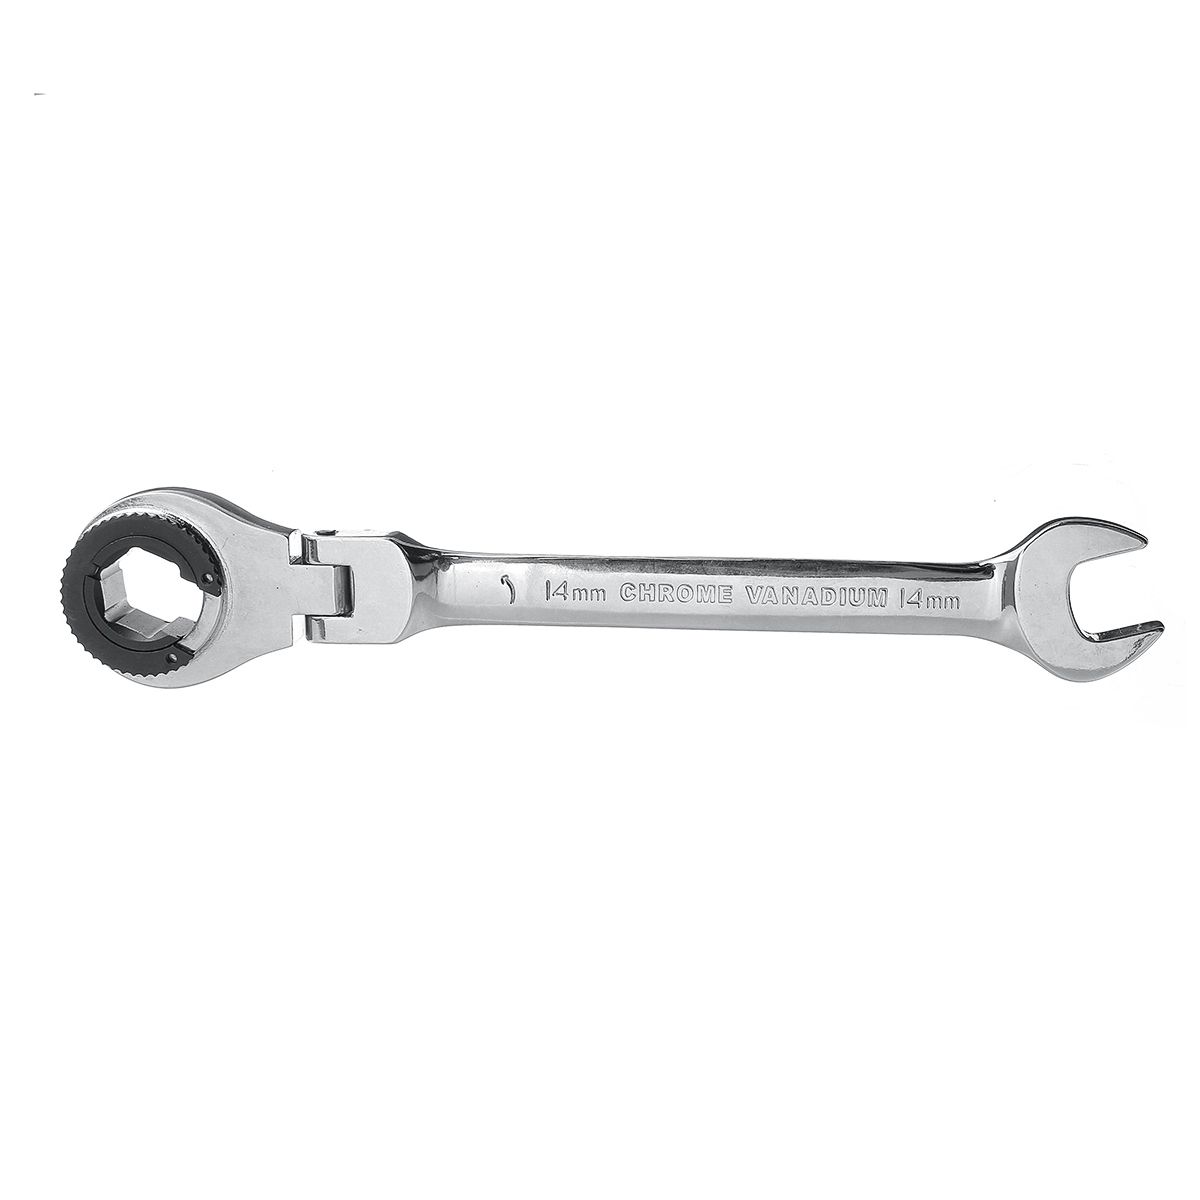 8-14mm-72-Tooth-Tubing-Ratchet-Wrench-Flexible-Head-Open-Spanners-Hand-Car-Repair-Tools-1763372